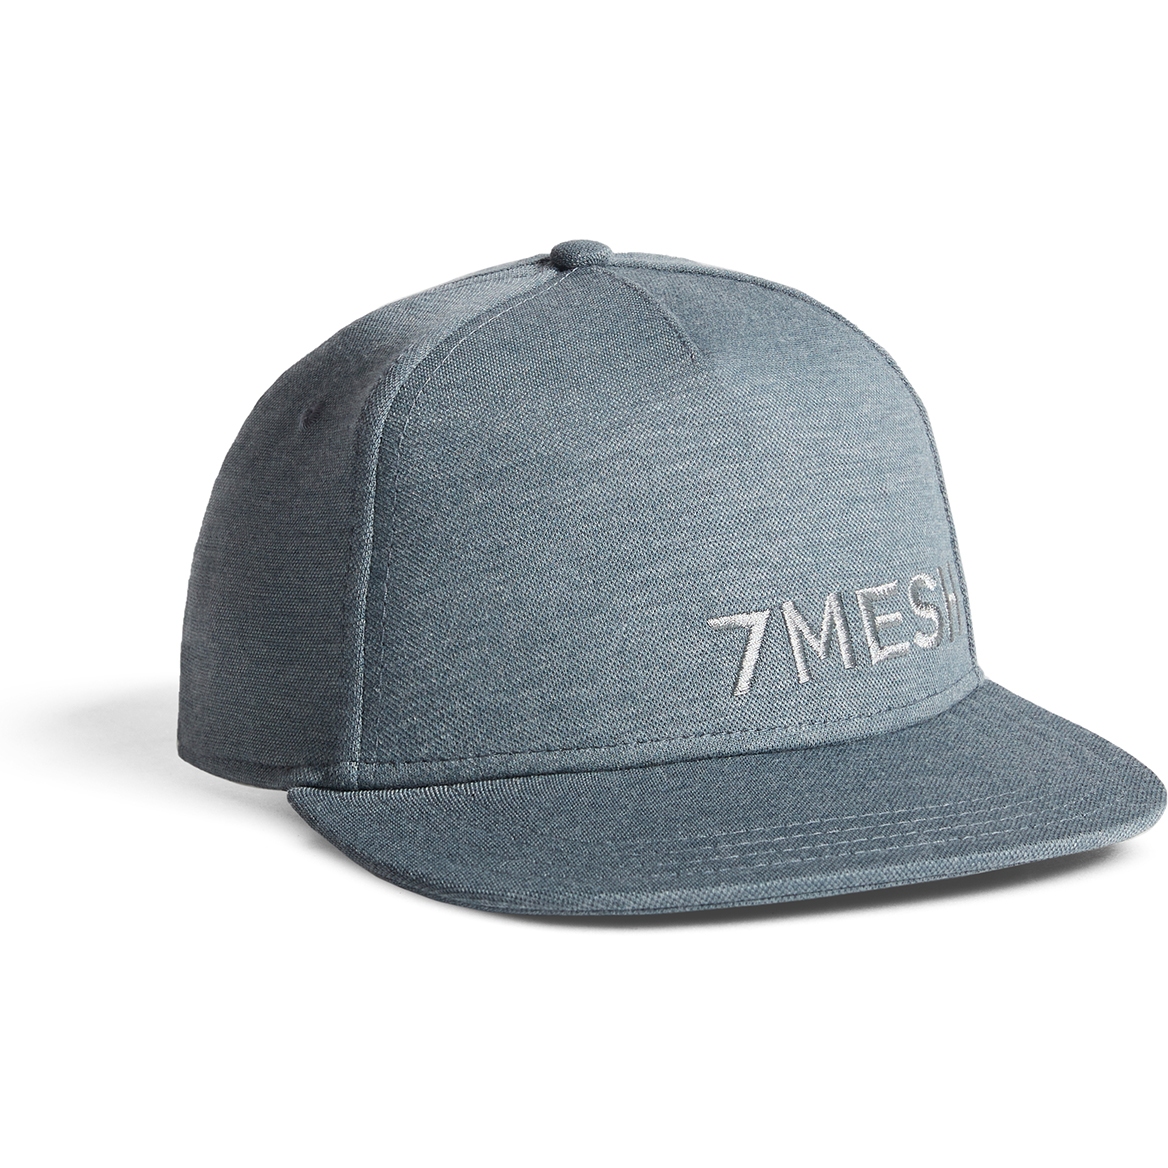 Image of 7mesh Apres Low Crown Hat - Charcoal